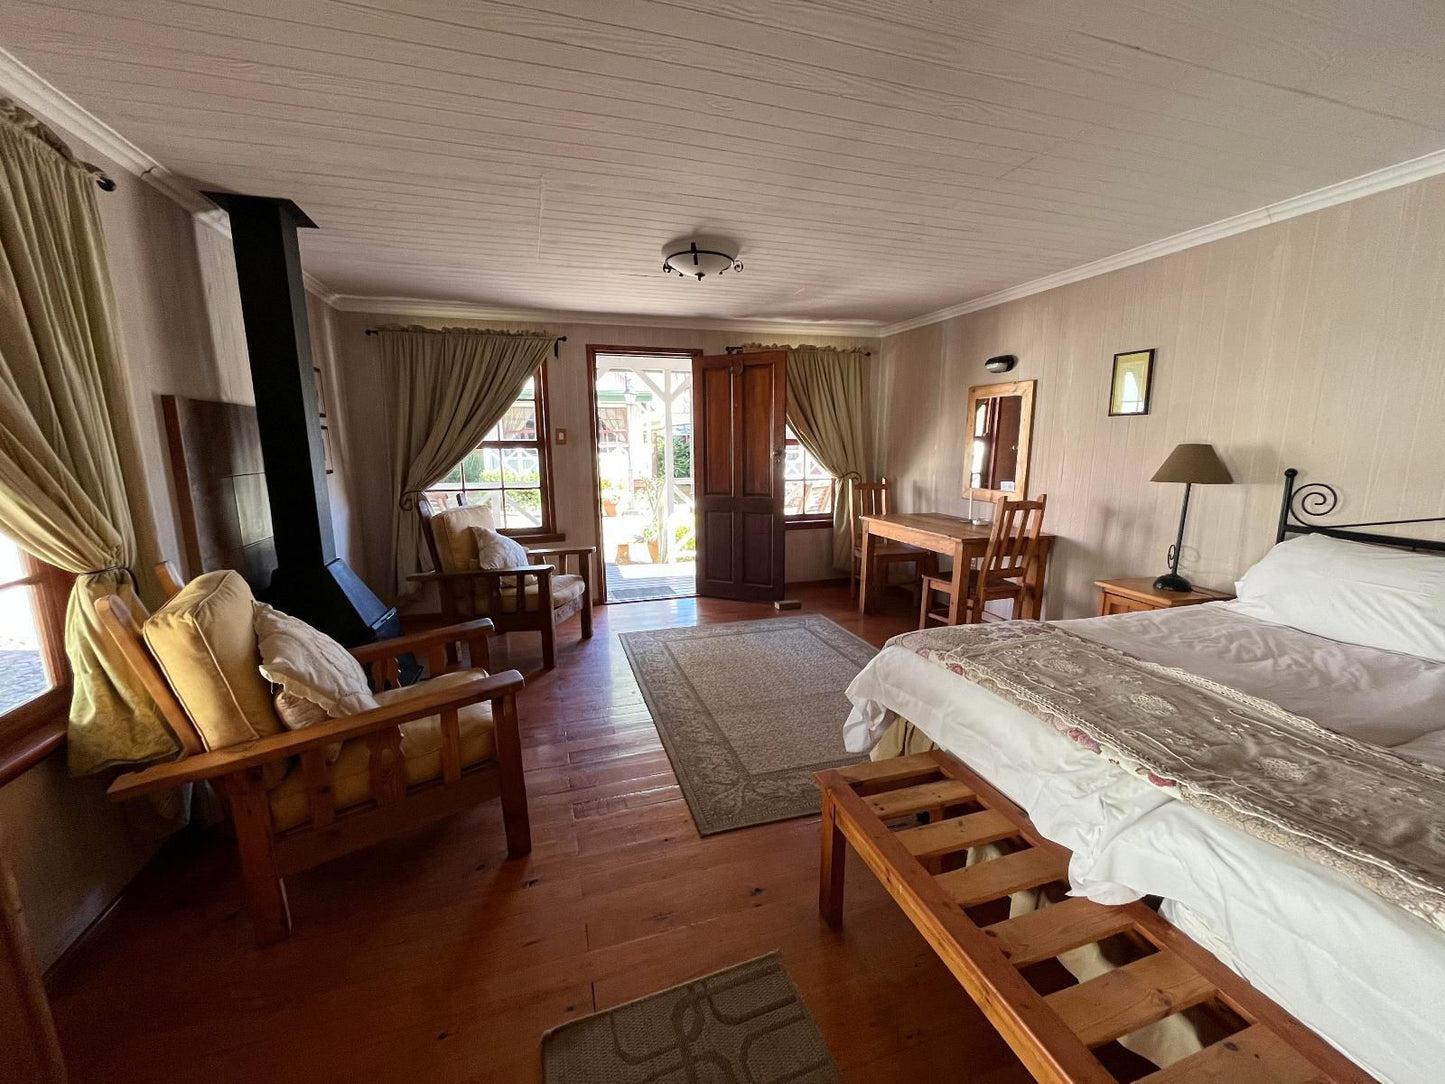 The Pennefather Haenertsburg Limpopo Province South Africa Bedroom